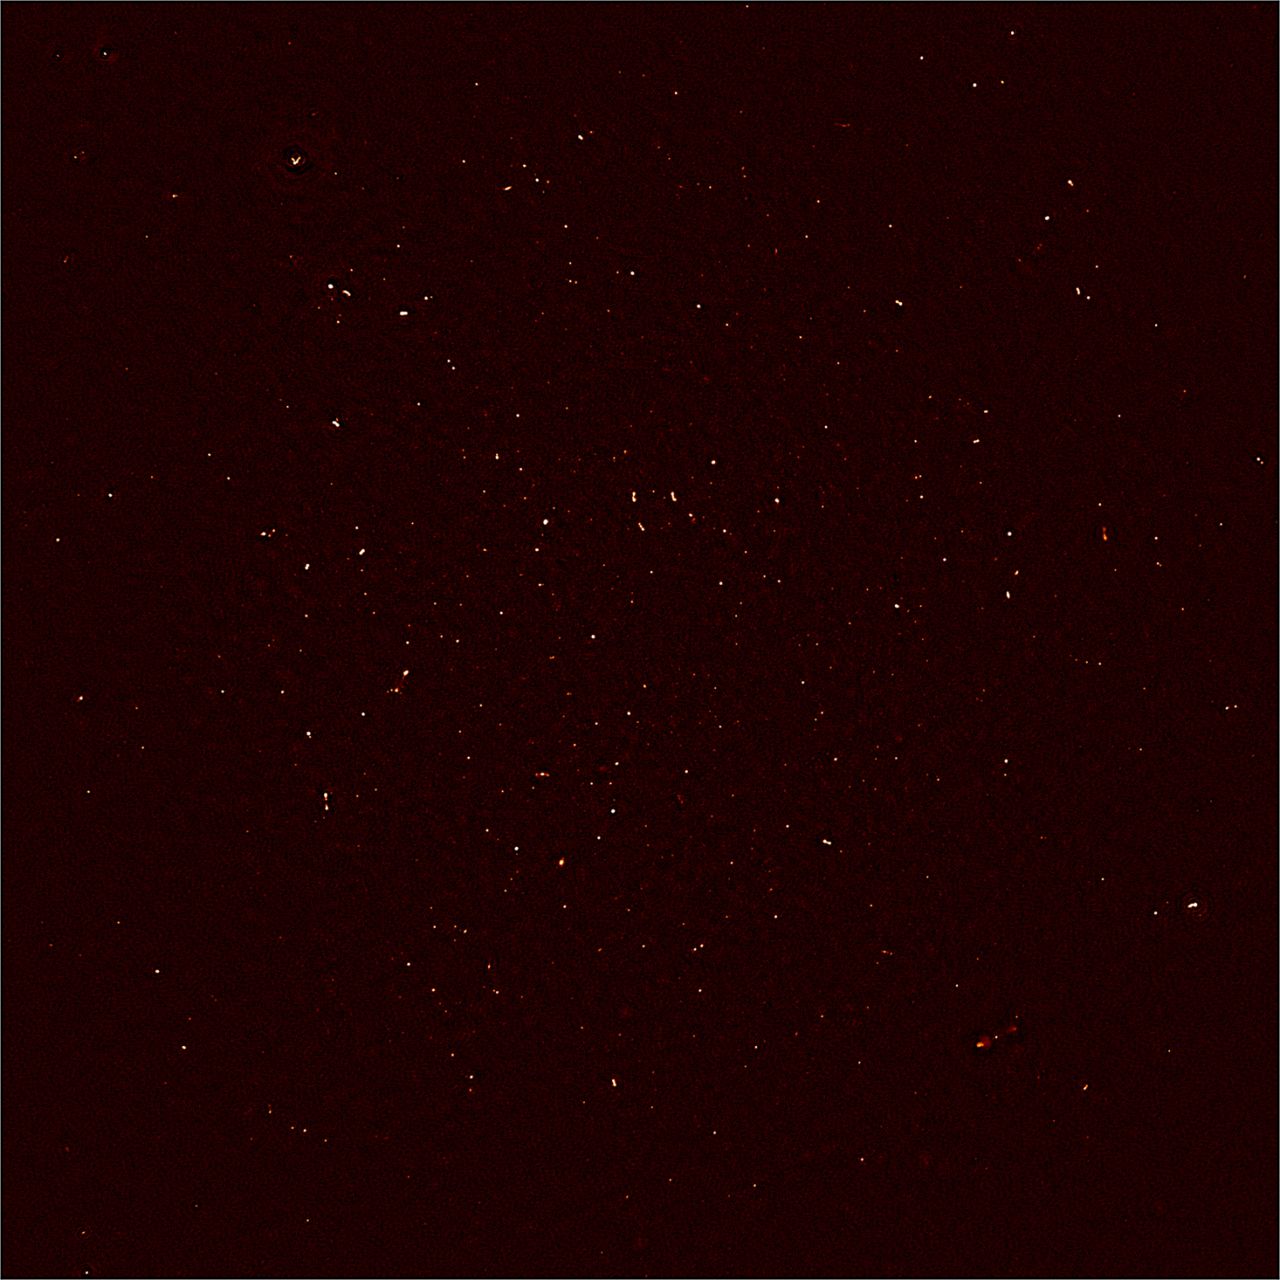 MeerKAT's First Light image. Each white dot represents the intensity of radio waves recorded with 16 dishes of the MeerKAT telescope in the Karoo desert. <br /><br />More than 1,300 individual objects - galaxies in the distant universe - are seen in this image.